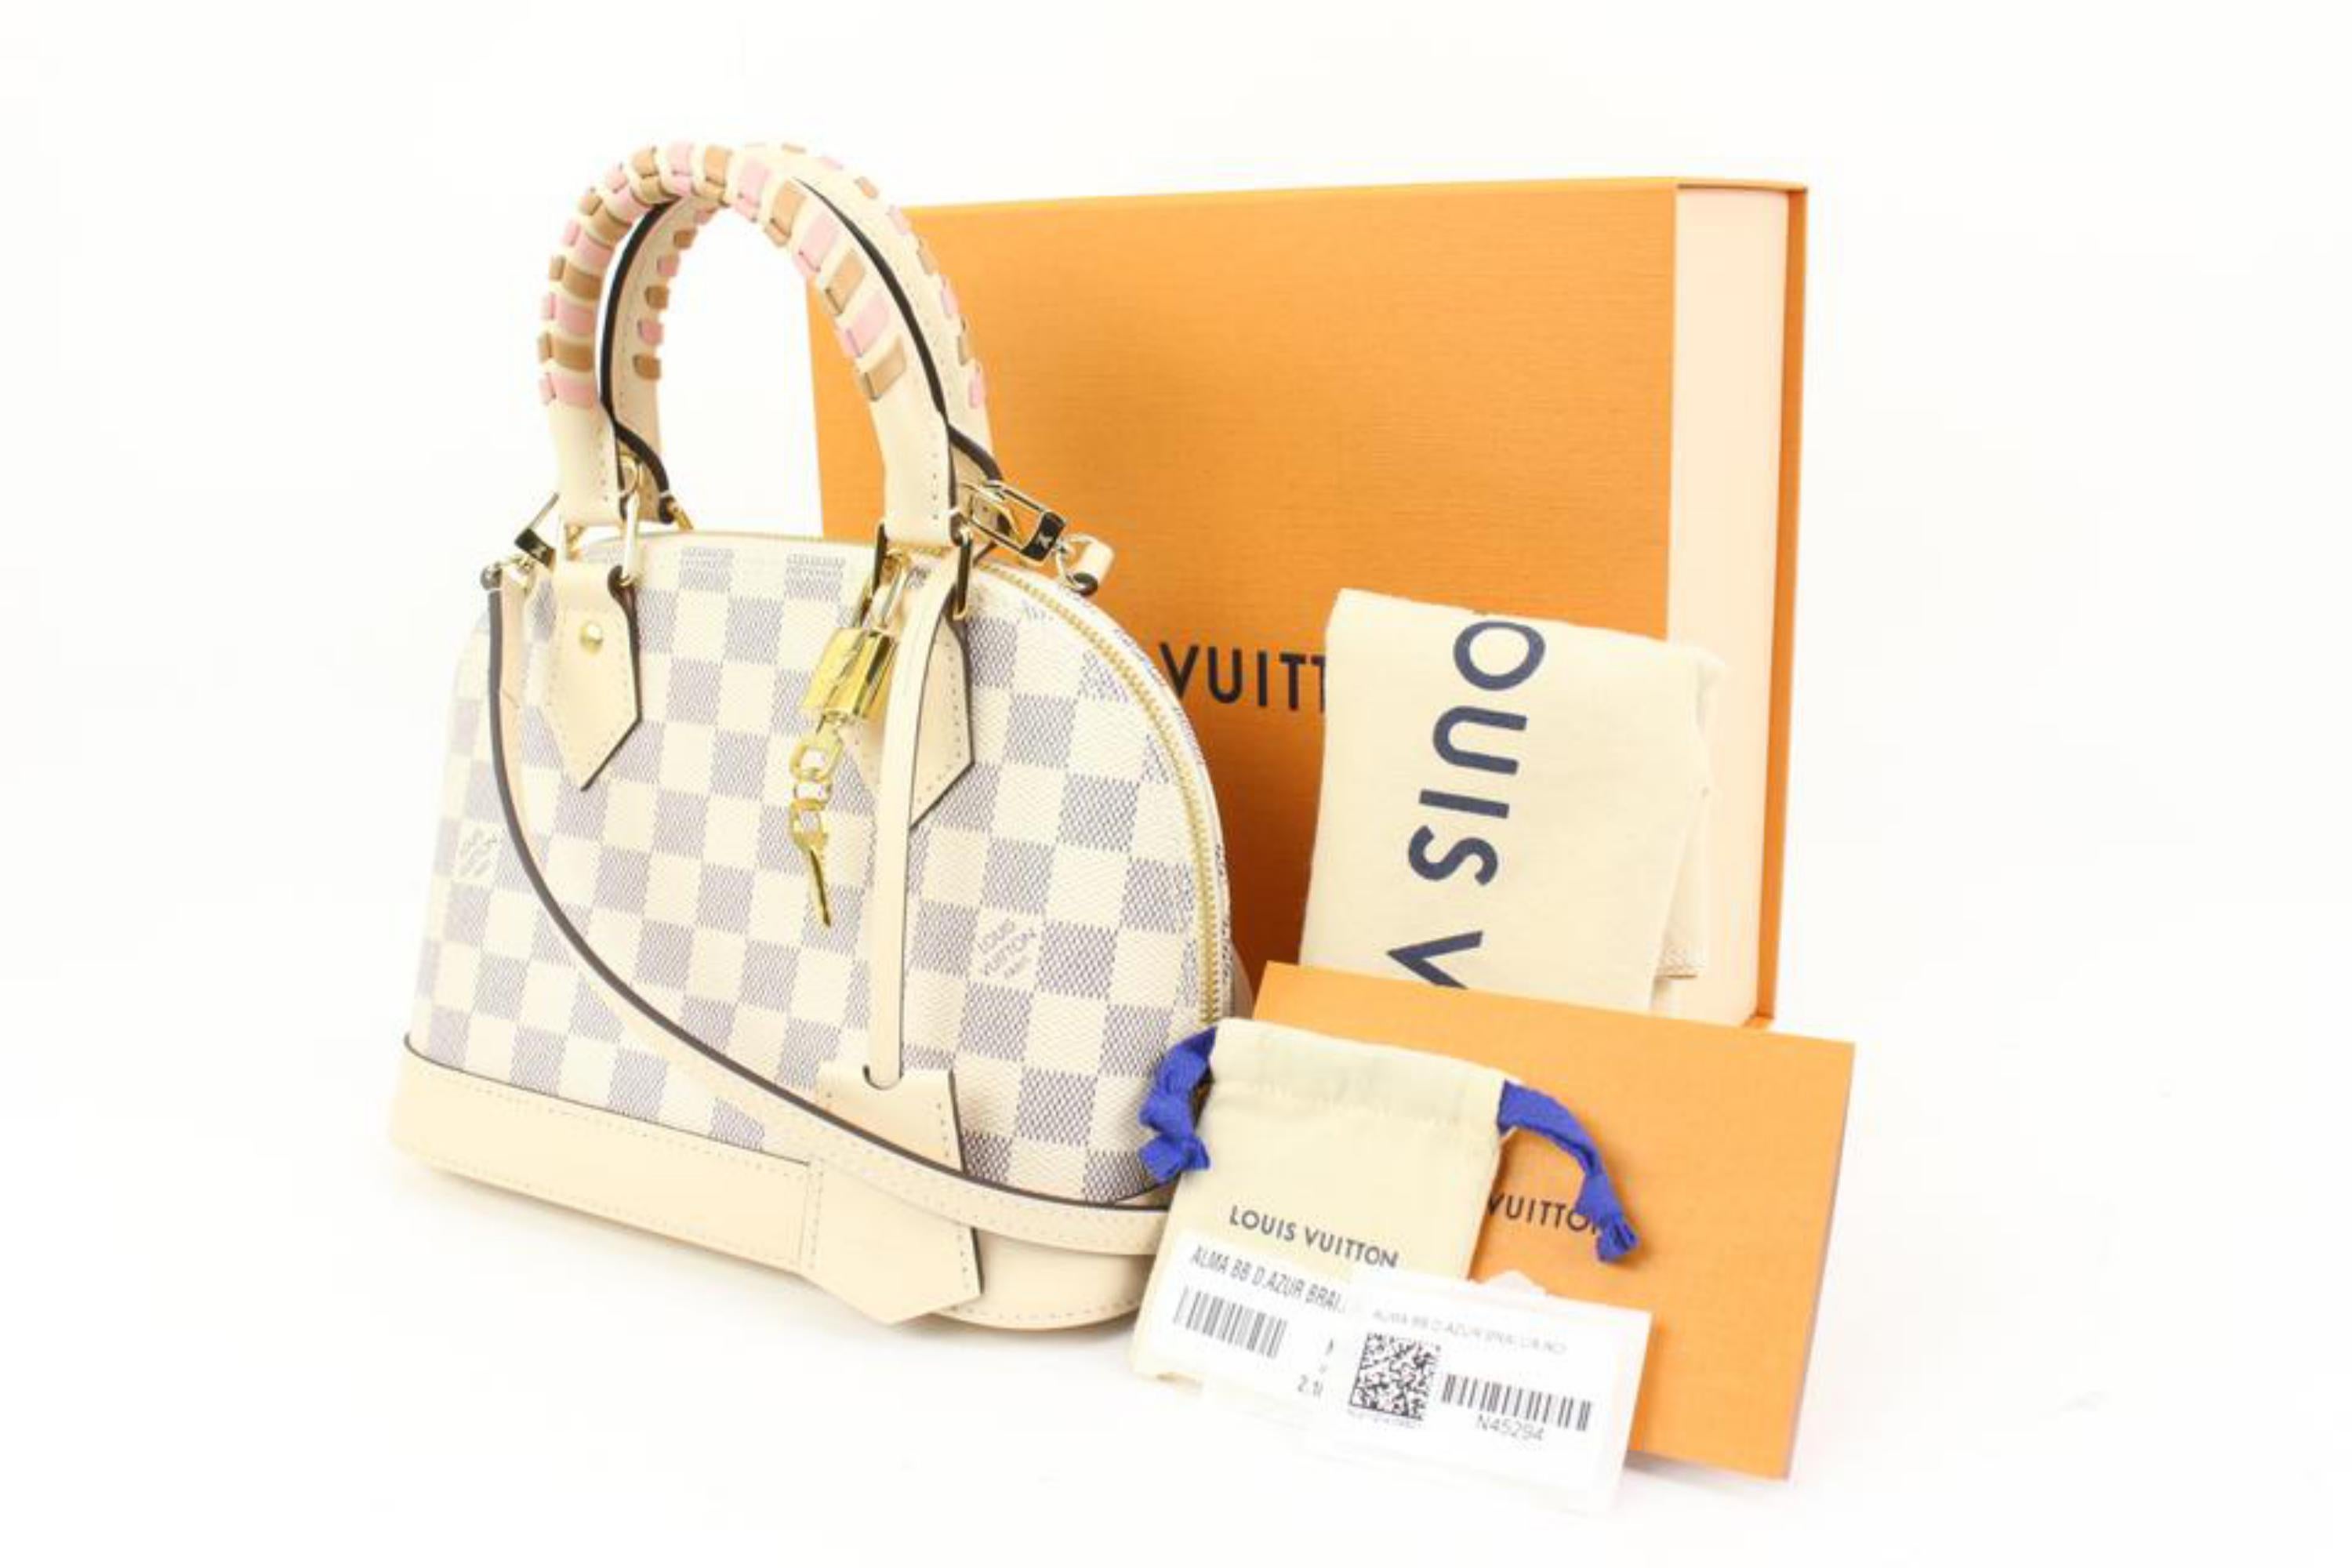 Louis Vuitton SS22 Limited Whip Damier Azur Alma BB Crossbody 44lk92
Date Code/Serial Number: RFID Chip
Made In: France
Measurements: Length:  9.5